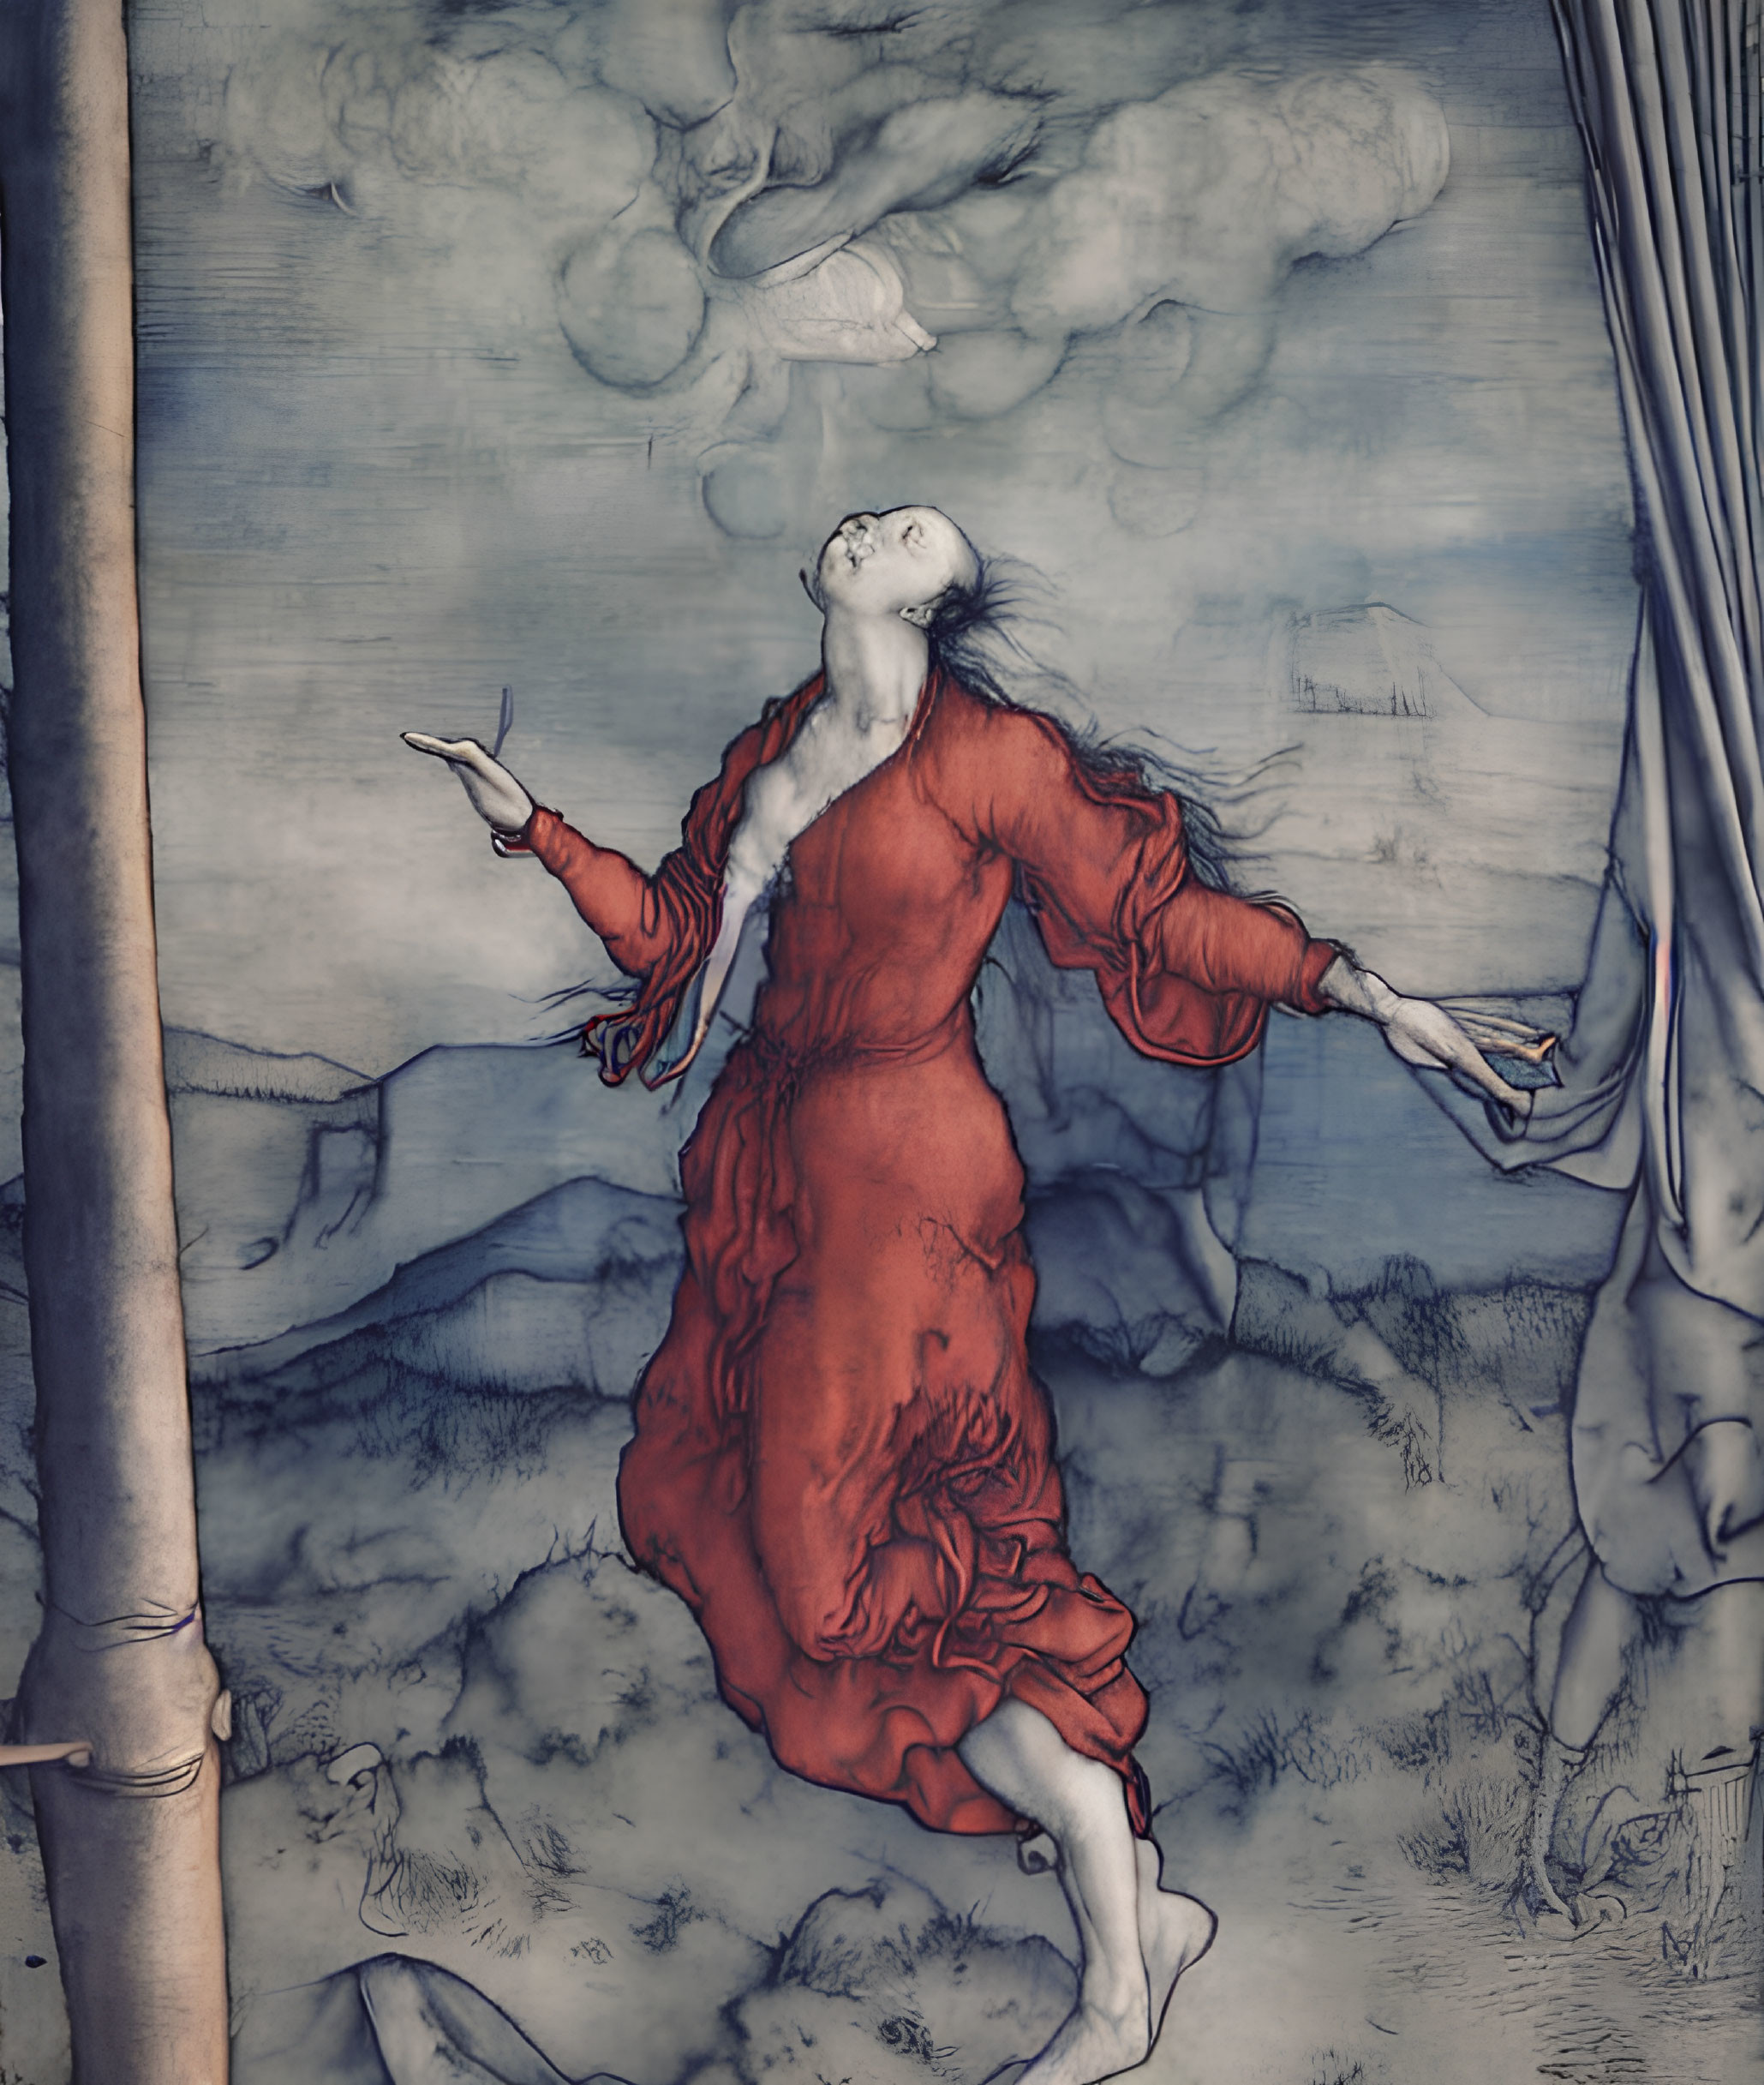 Woman in Red Dress Floating in Air Against Cloudy Sky